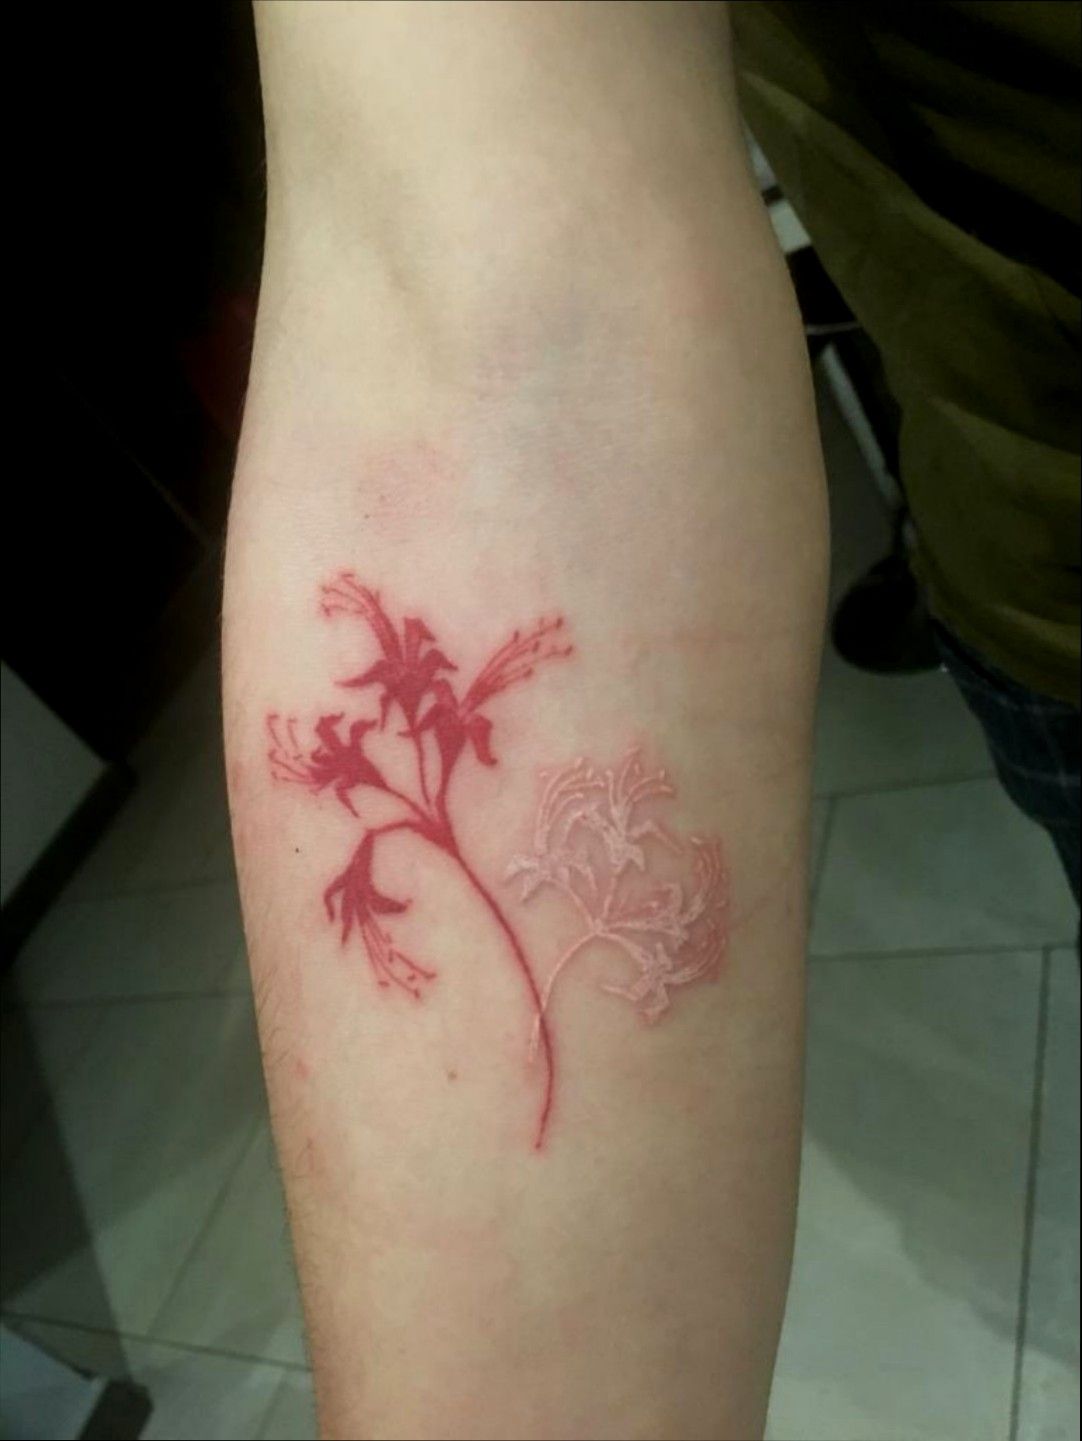 Tattoo Uploaded By Joy Cohen Red And White Spider Lilies Hope You Like It 3rl Viking Ink Flowers Tattoo Garden Flowertattoo Tokyoghoul 0924 Tattoodo